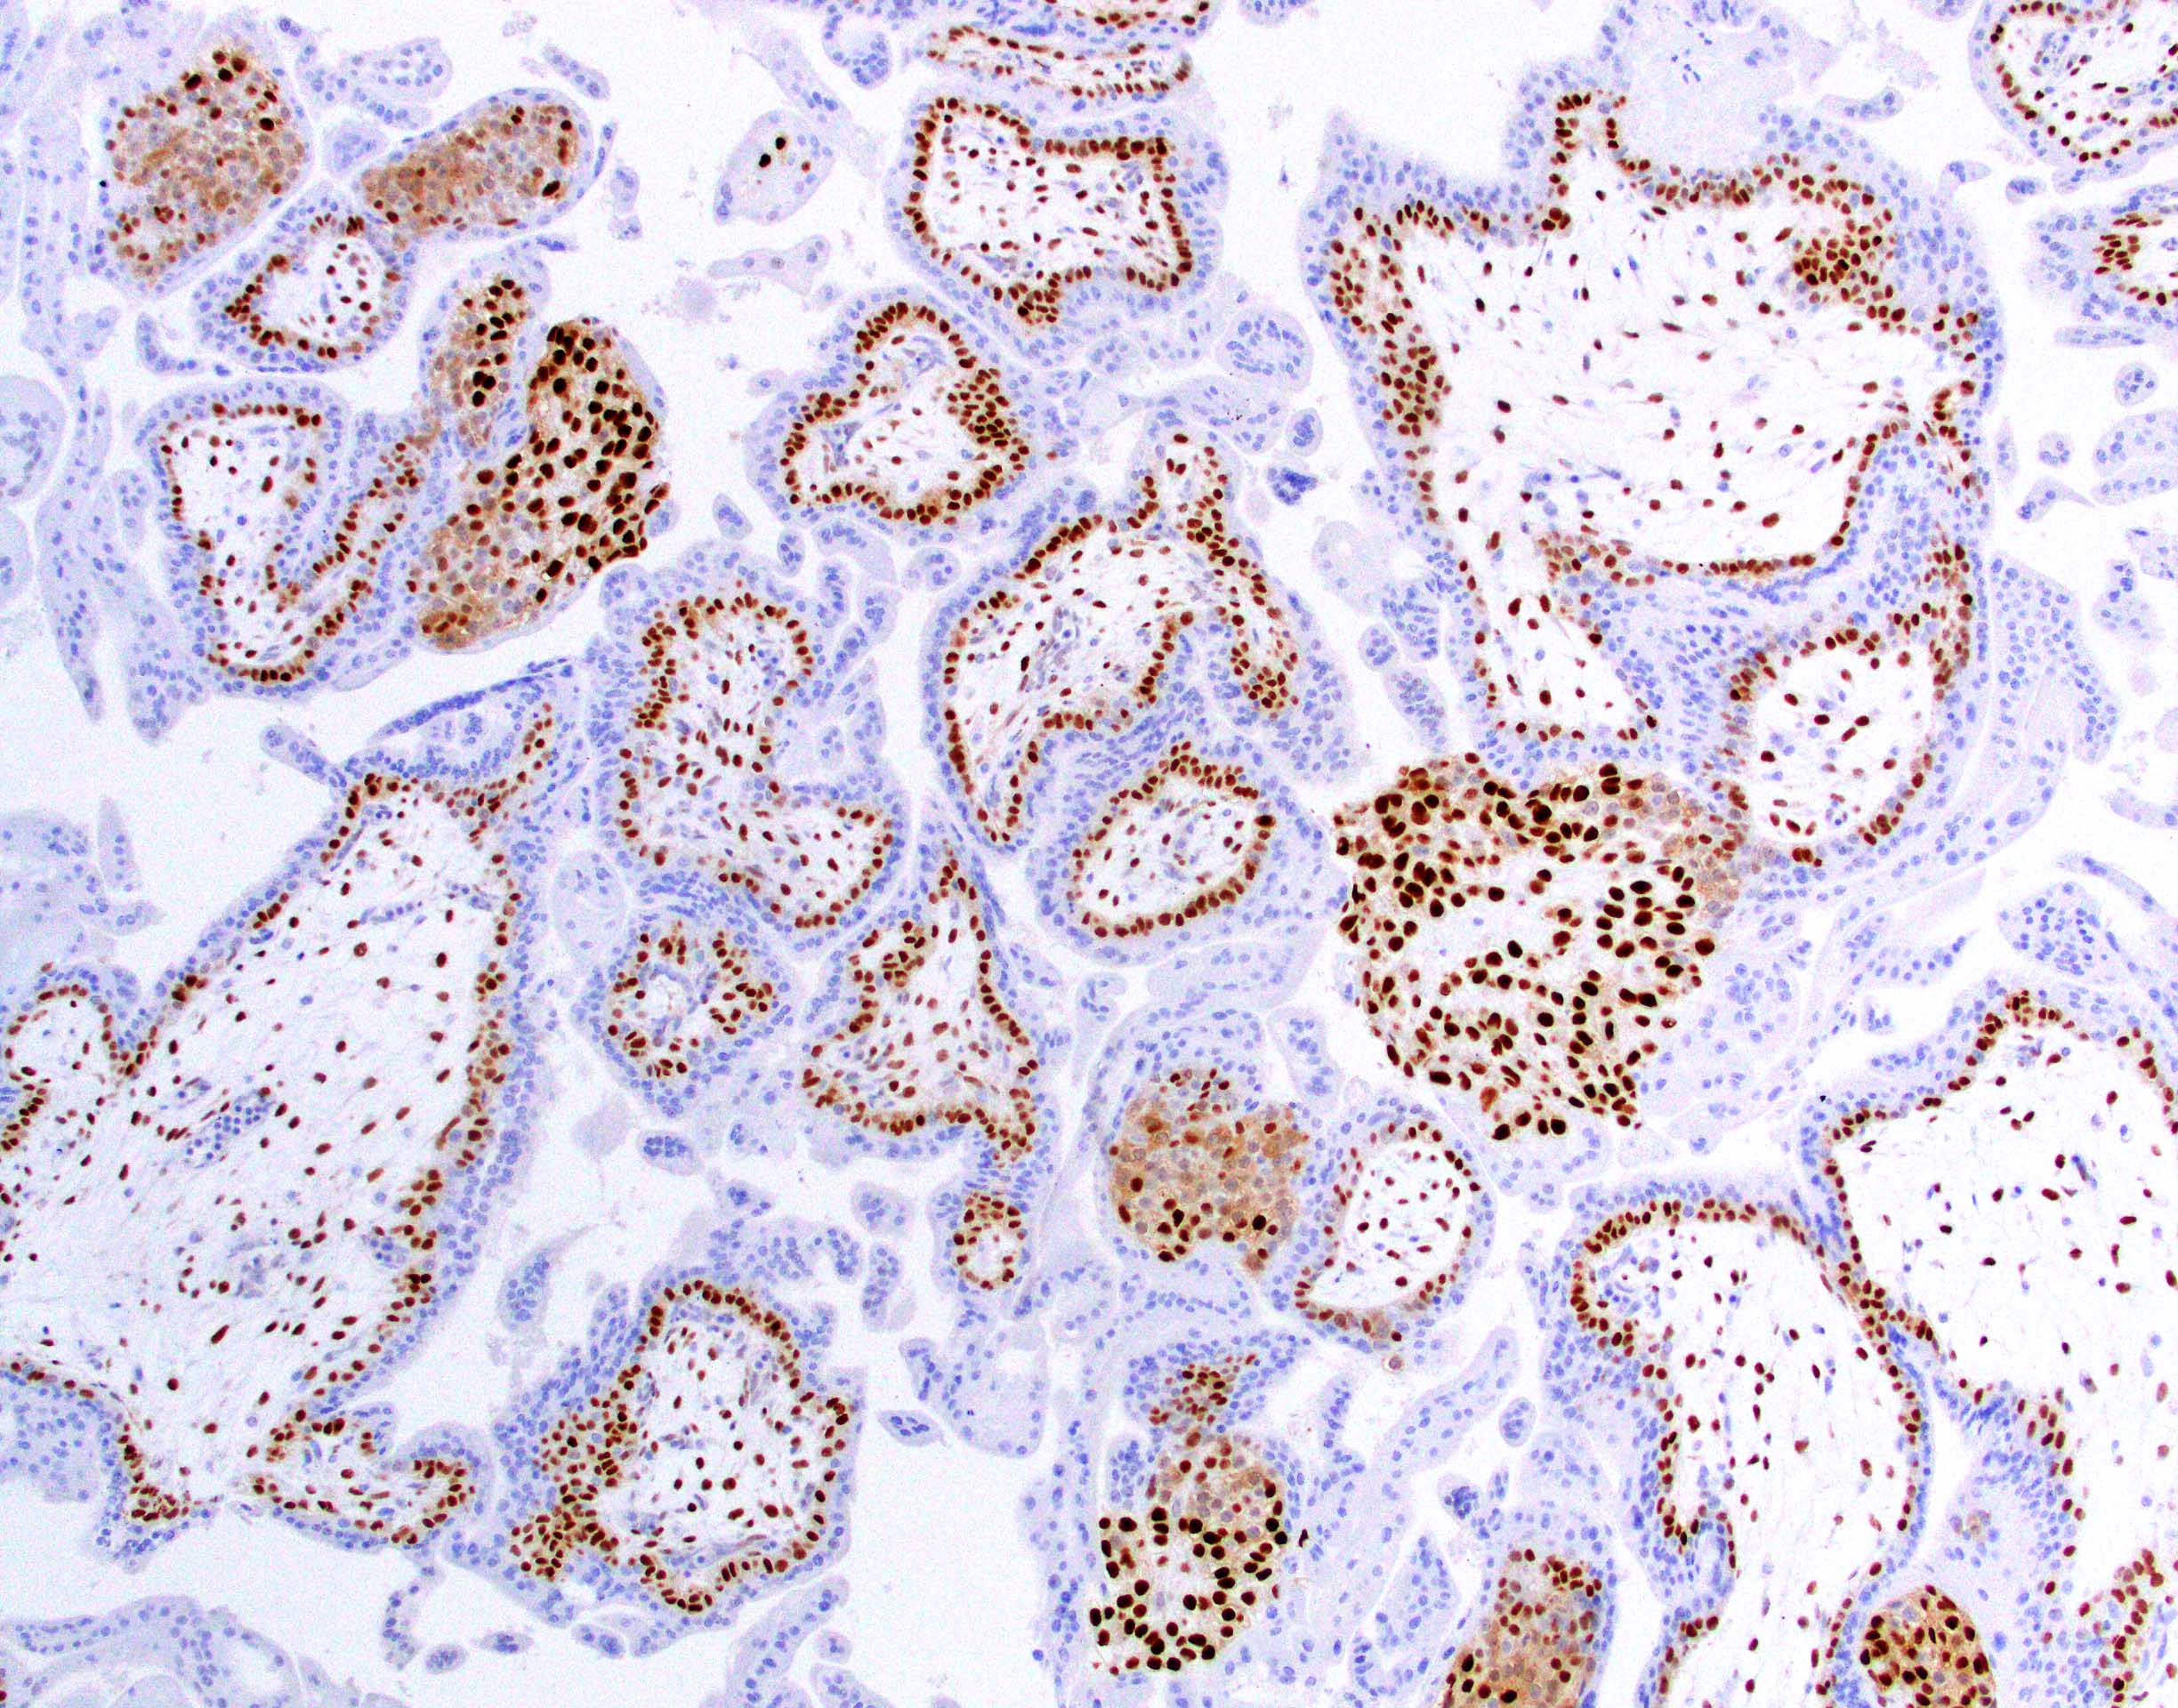 Normal p57 staining pattern